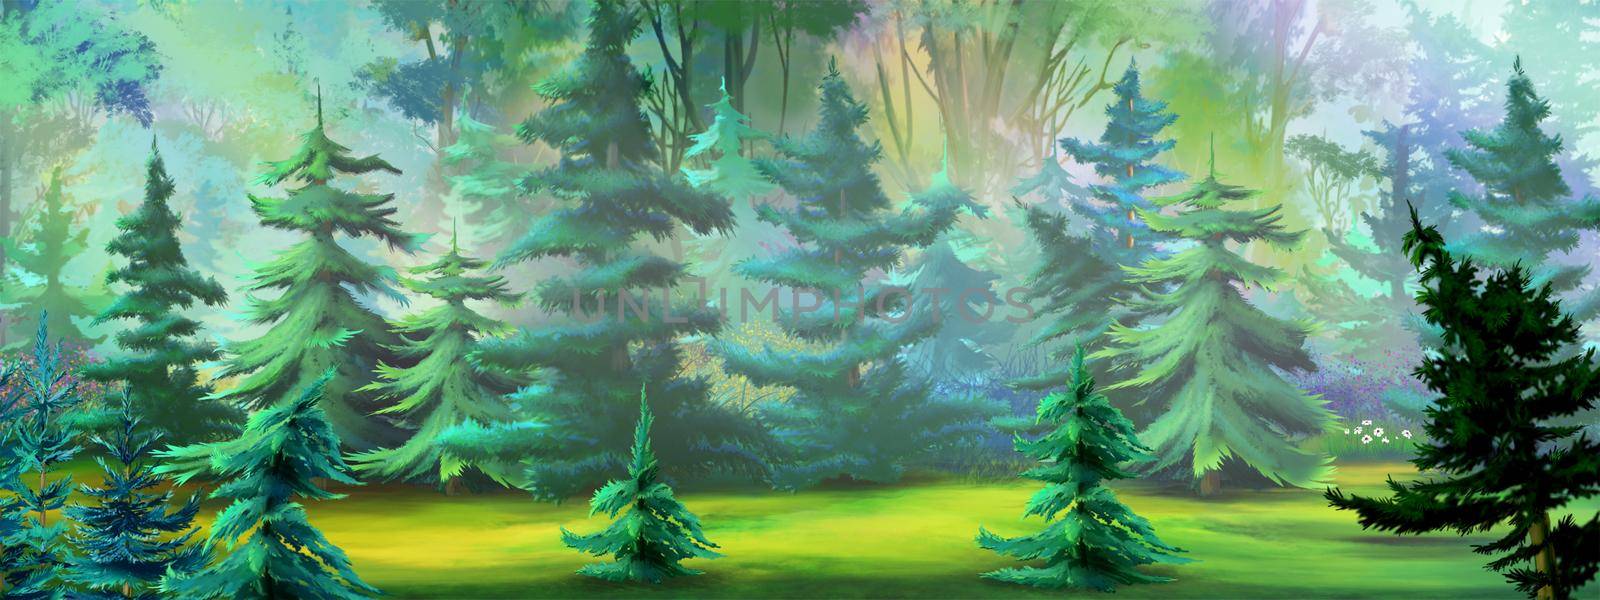 Fir trees in the coniferous forest on a sunny day. Digital Painting Background, Illustration.